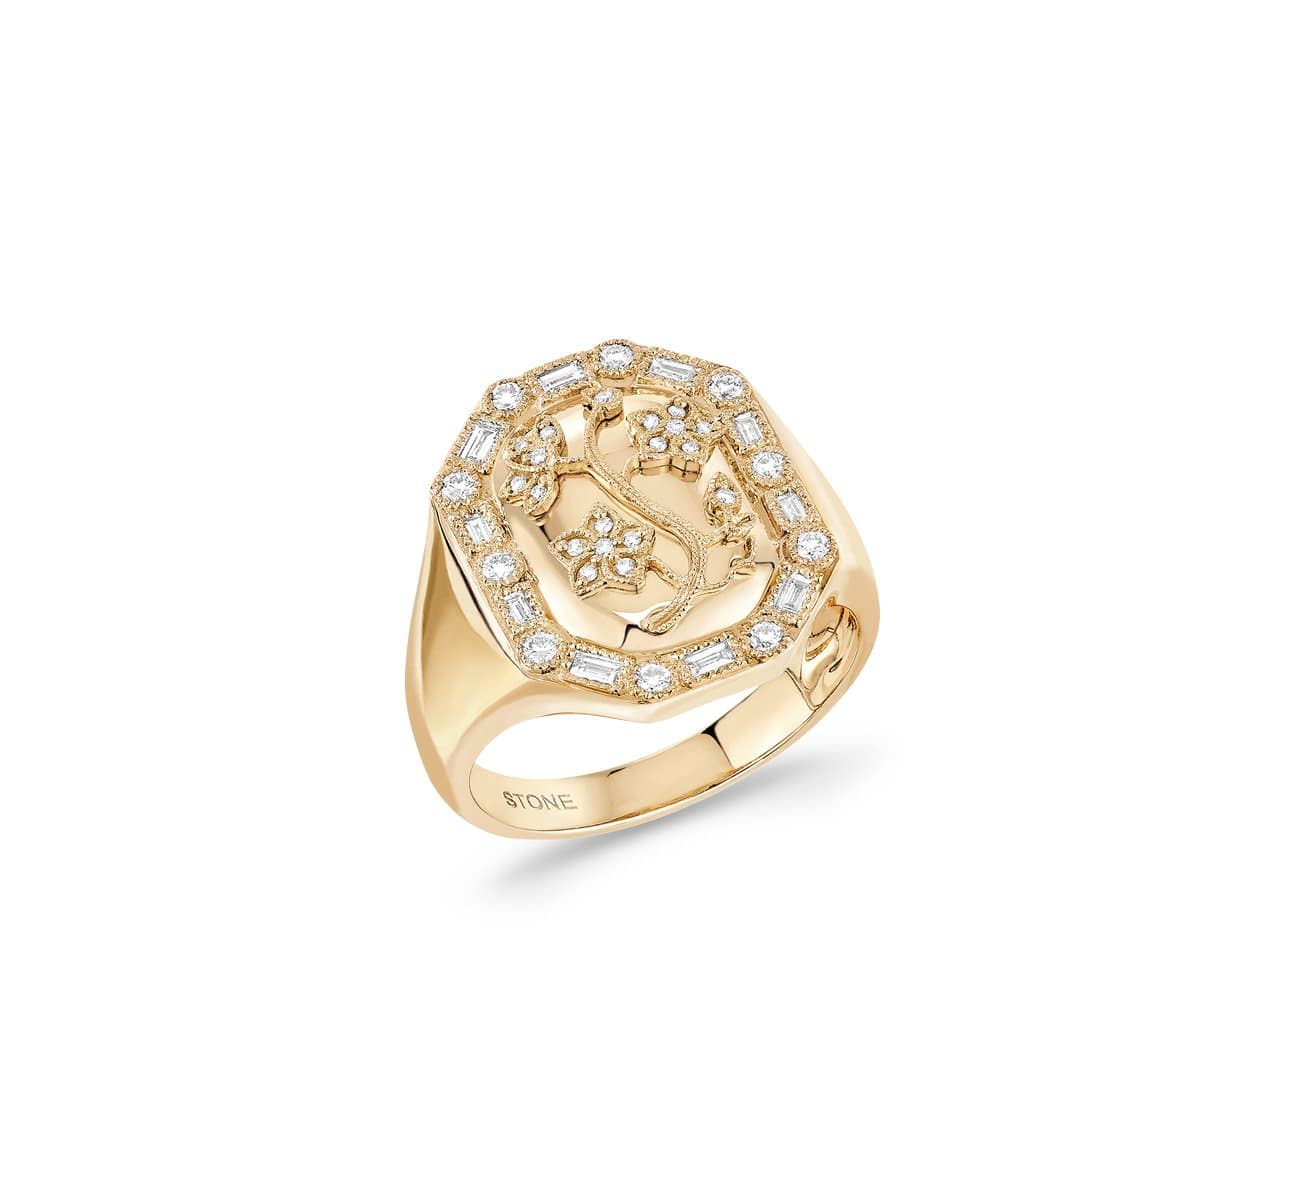 Cherry Blossom Gold and diamonds signet ring